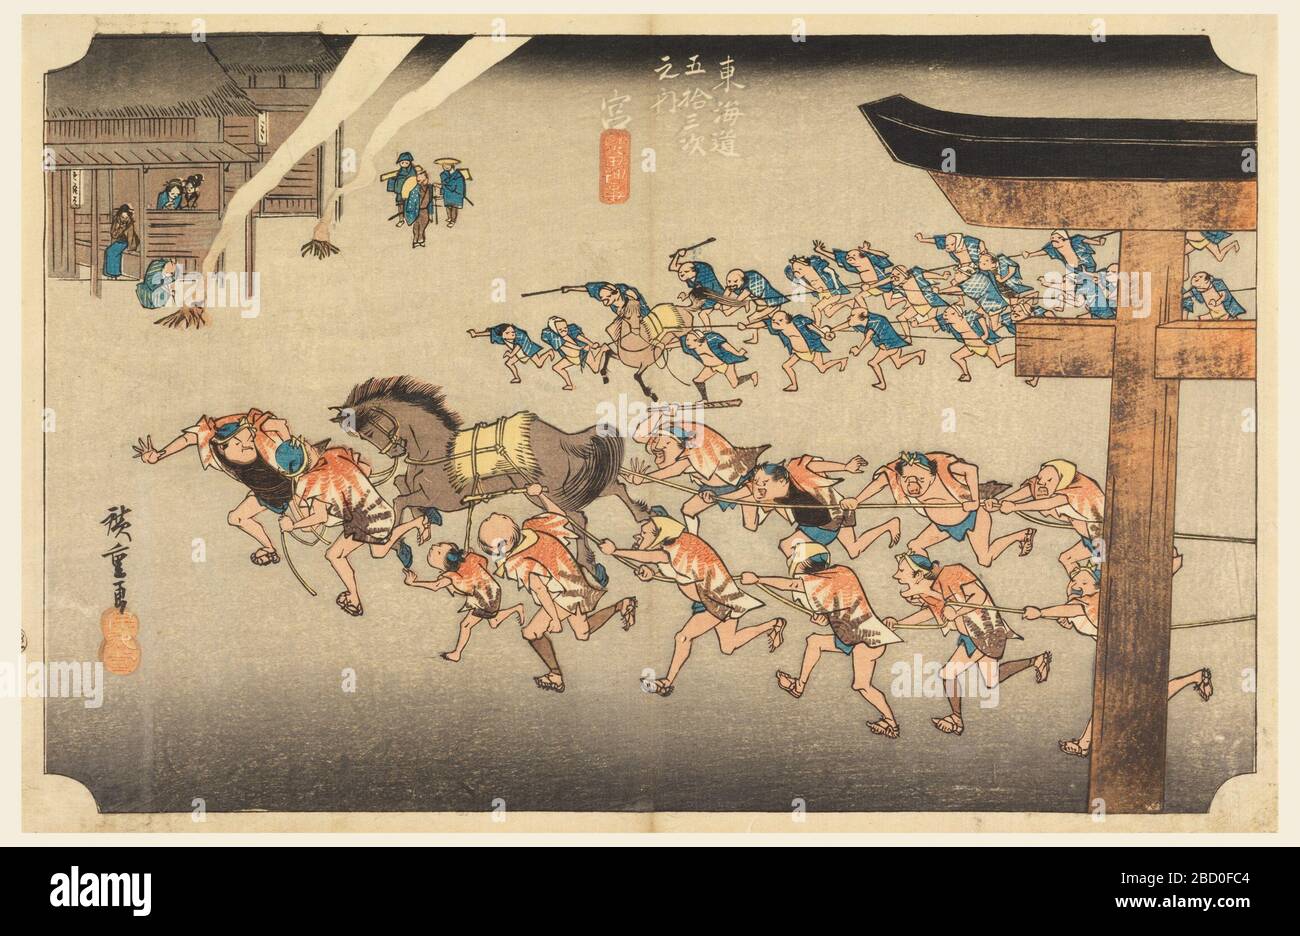 Miya Atsuta Jiuji Temple Fete in The FiftyThree Stations of the Tokaido Road Tokaido Gojusan Tsugino Uchi. Research in ProgressTwo teams of men, each with horse, hauling festival cars (not visible), from right to left. Right, part of Torii is seen. Left, building outside of which are two fires, and people watching activities. Miya Atsuta Jiuji Temple Fete in The FiftyThree Stations of the Tokaido Road Tokaido Gojusan Tsugino Uchi Stock Photo